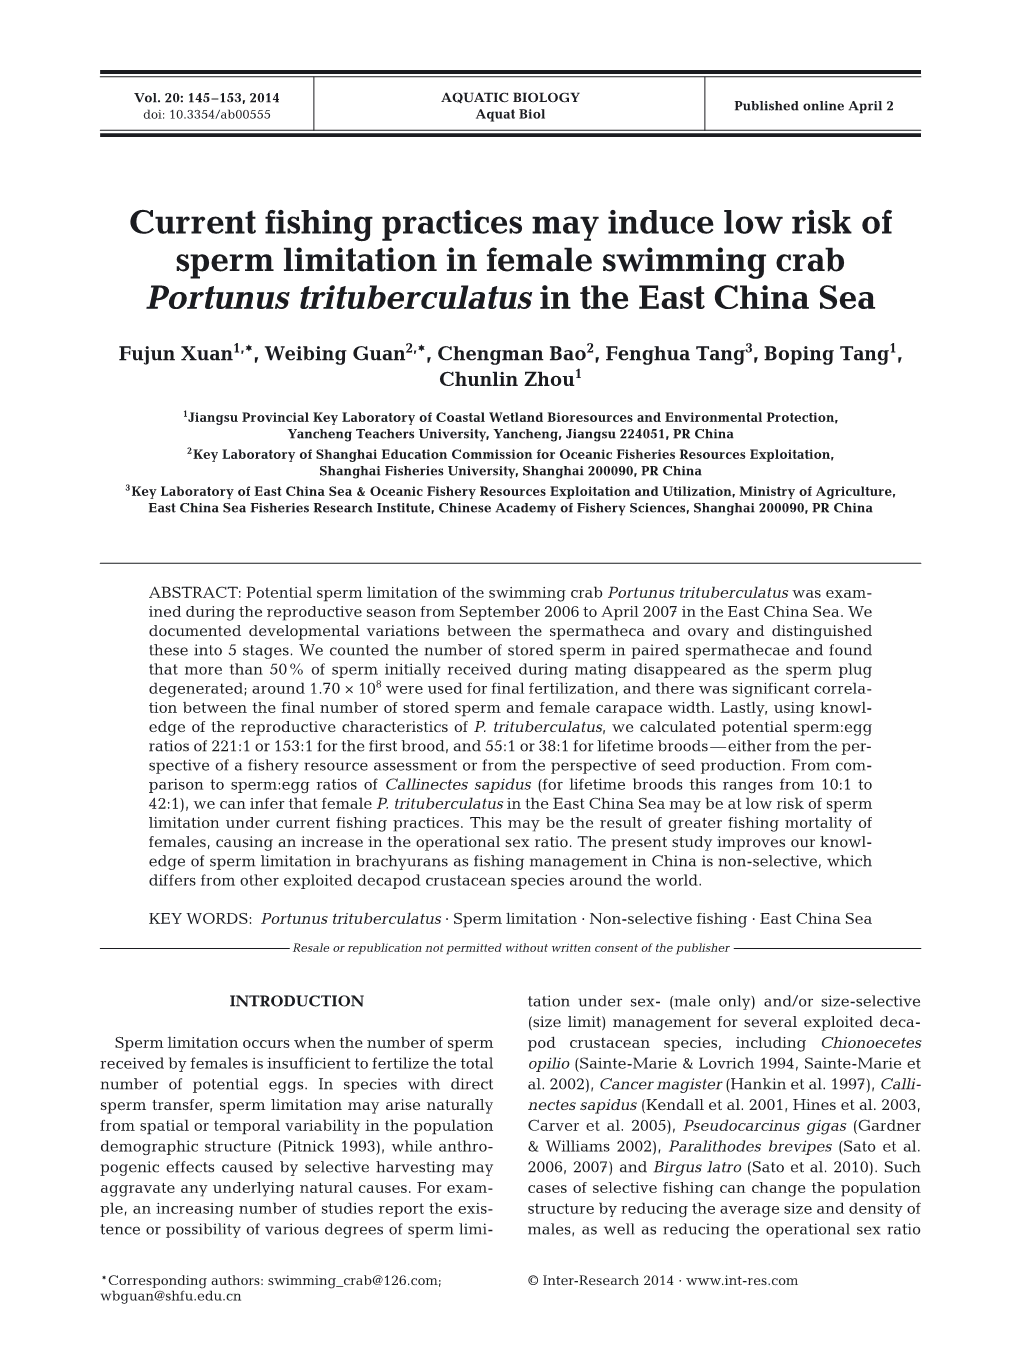 Current Fishing Practices May Induce Low Risk of Sperm Limitation in Female Swimming Crab Portunus Trituberculatus in the East China Sea